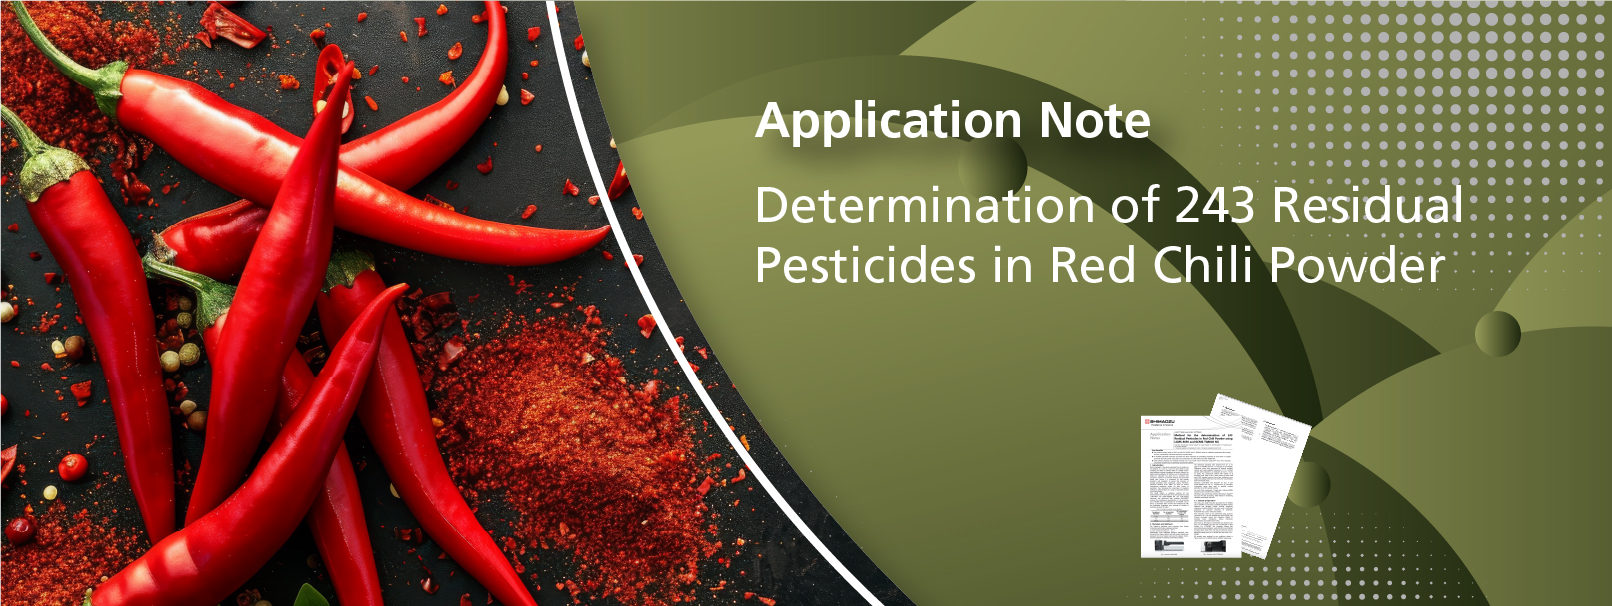 Determination of 243 Residual Pesticides in Red Chili Powder